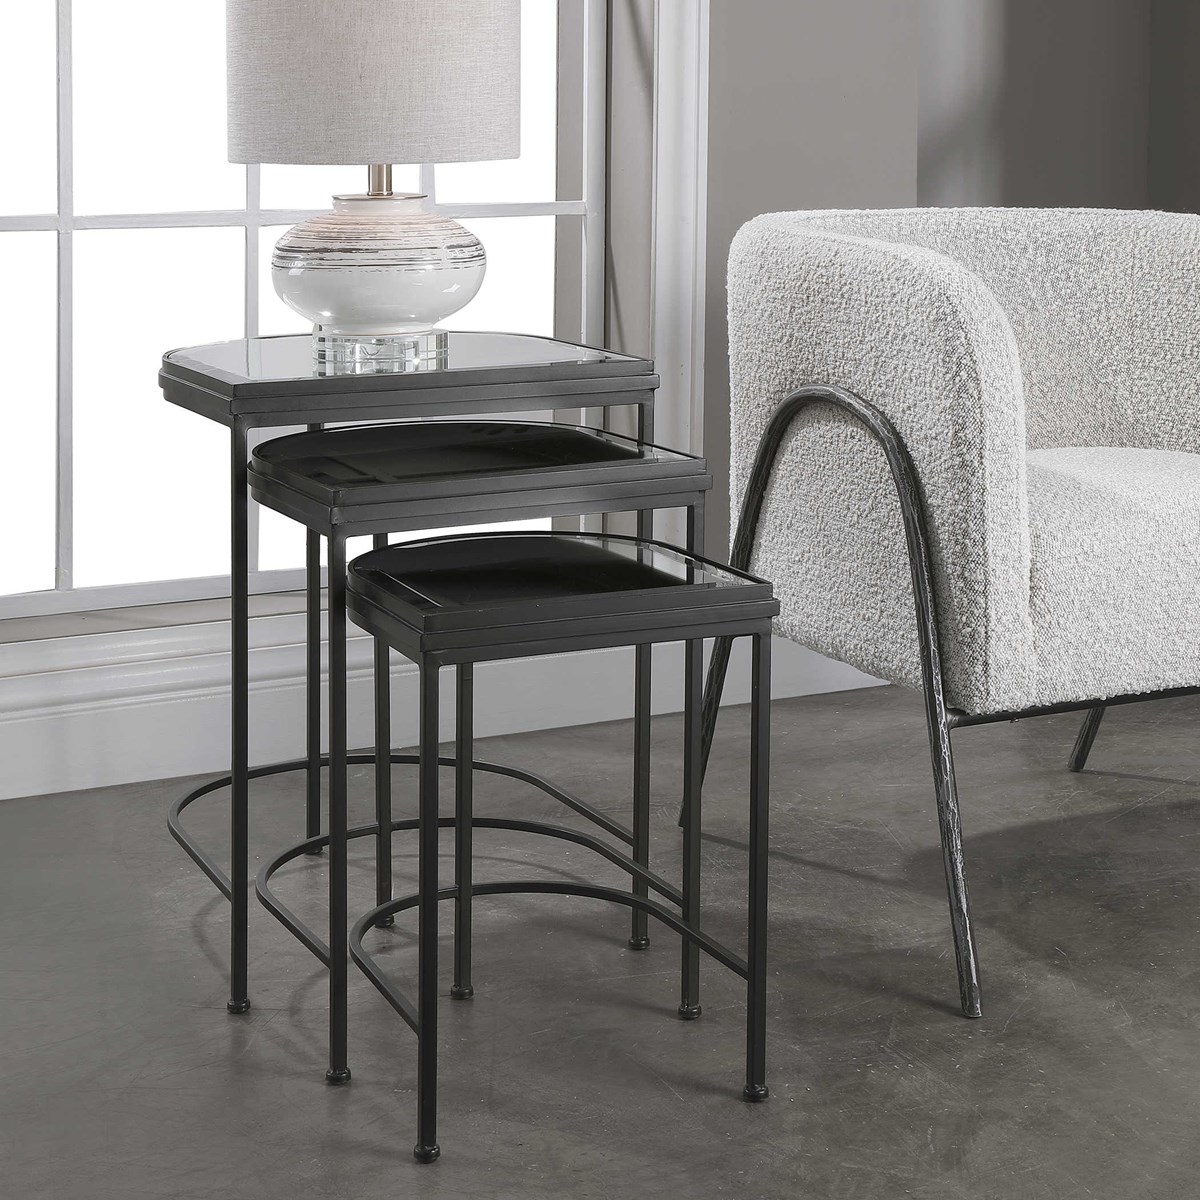 Picture of 212 Main 24965 28 x 23 x 21.625 in. India Nesting Tables  Black - Set of 3